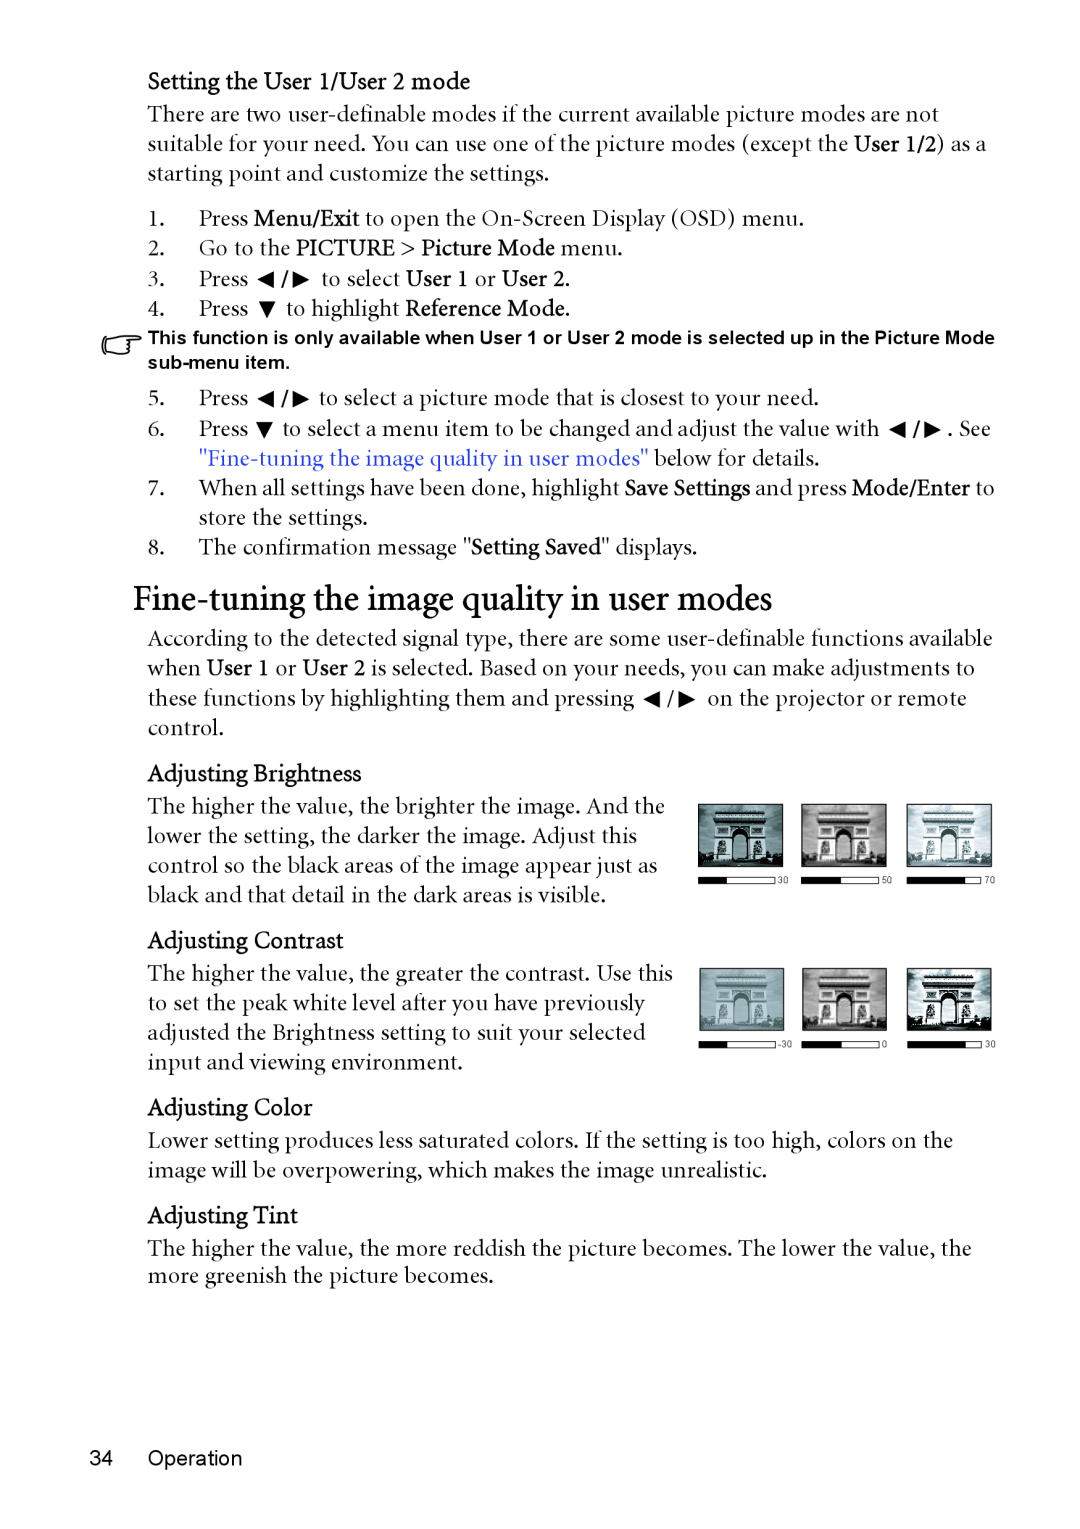 BenQ MP526, MP576, MP575 Fine-tuning the image quality in user modes, Setting the User 1/User 2 mode, Adjusting Brightness 